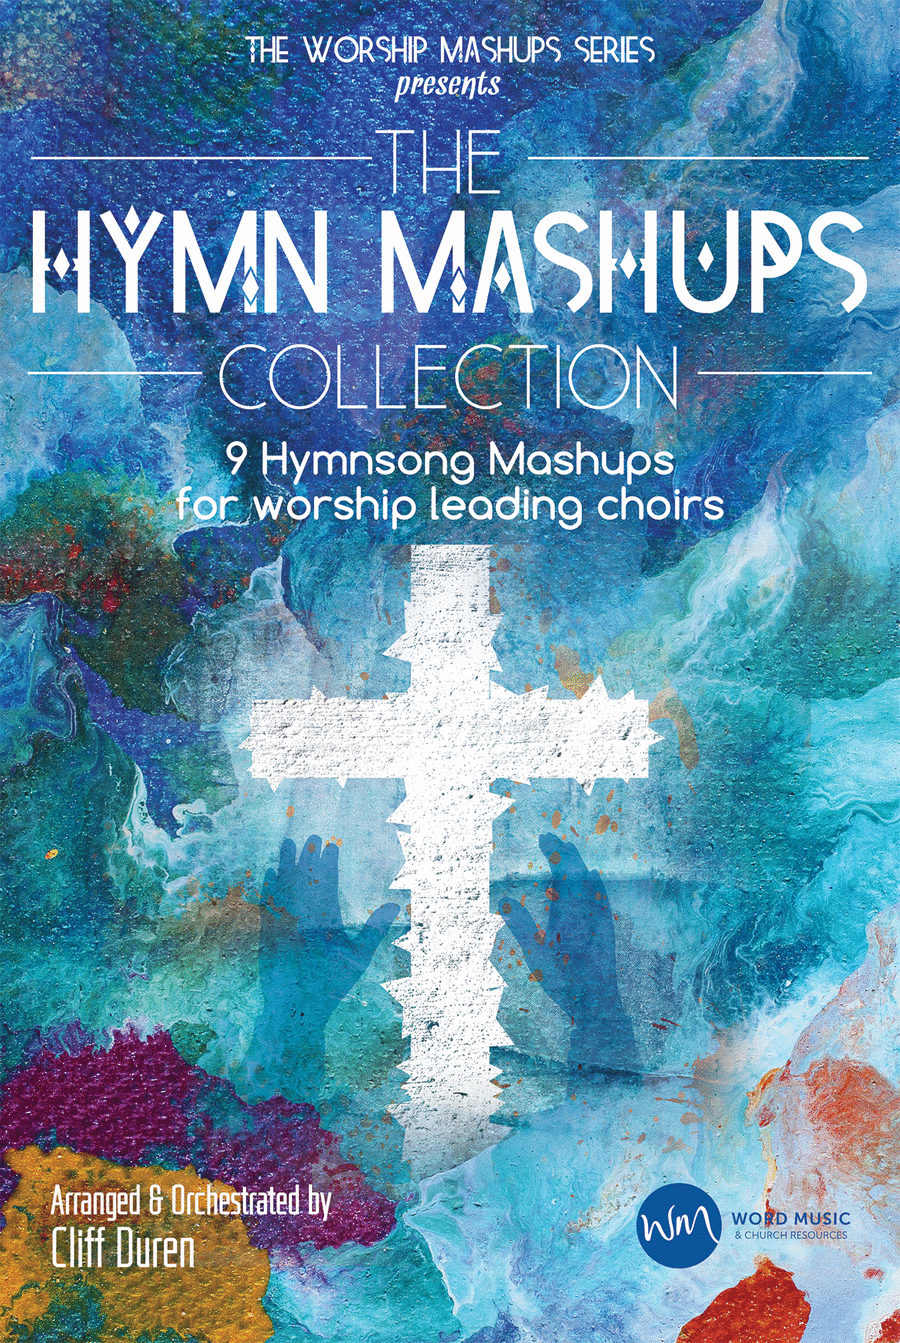 The Hymn Mashups Collection - CD Preview Pak